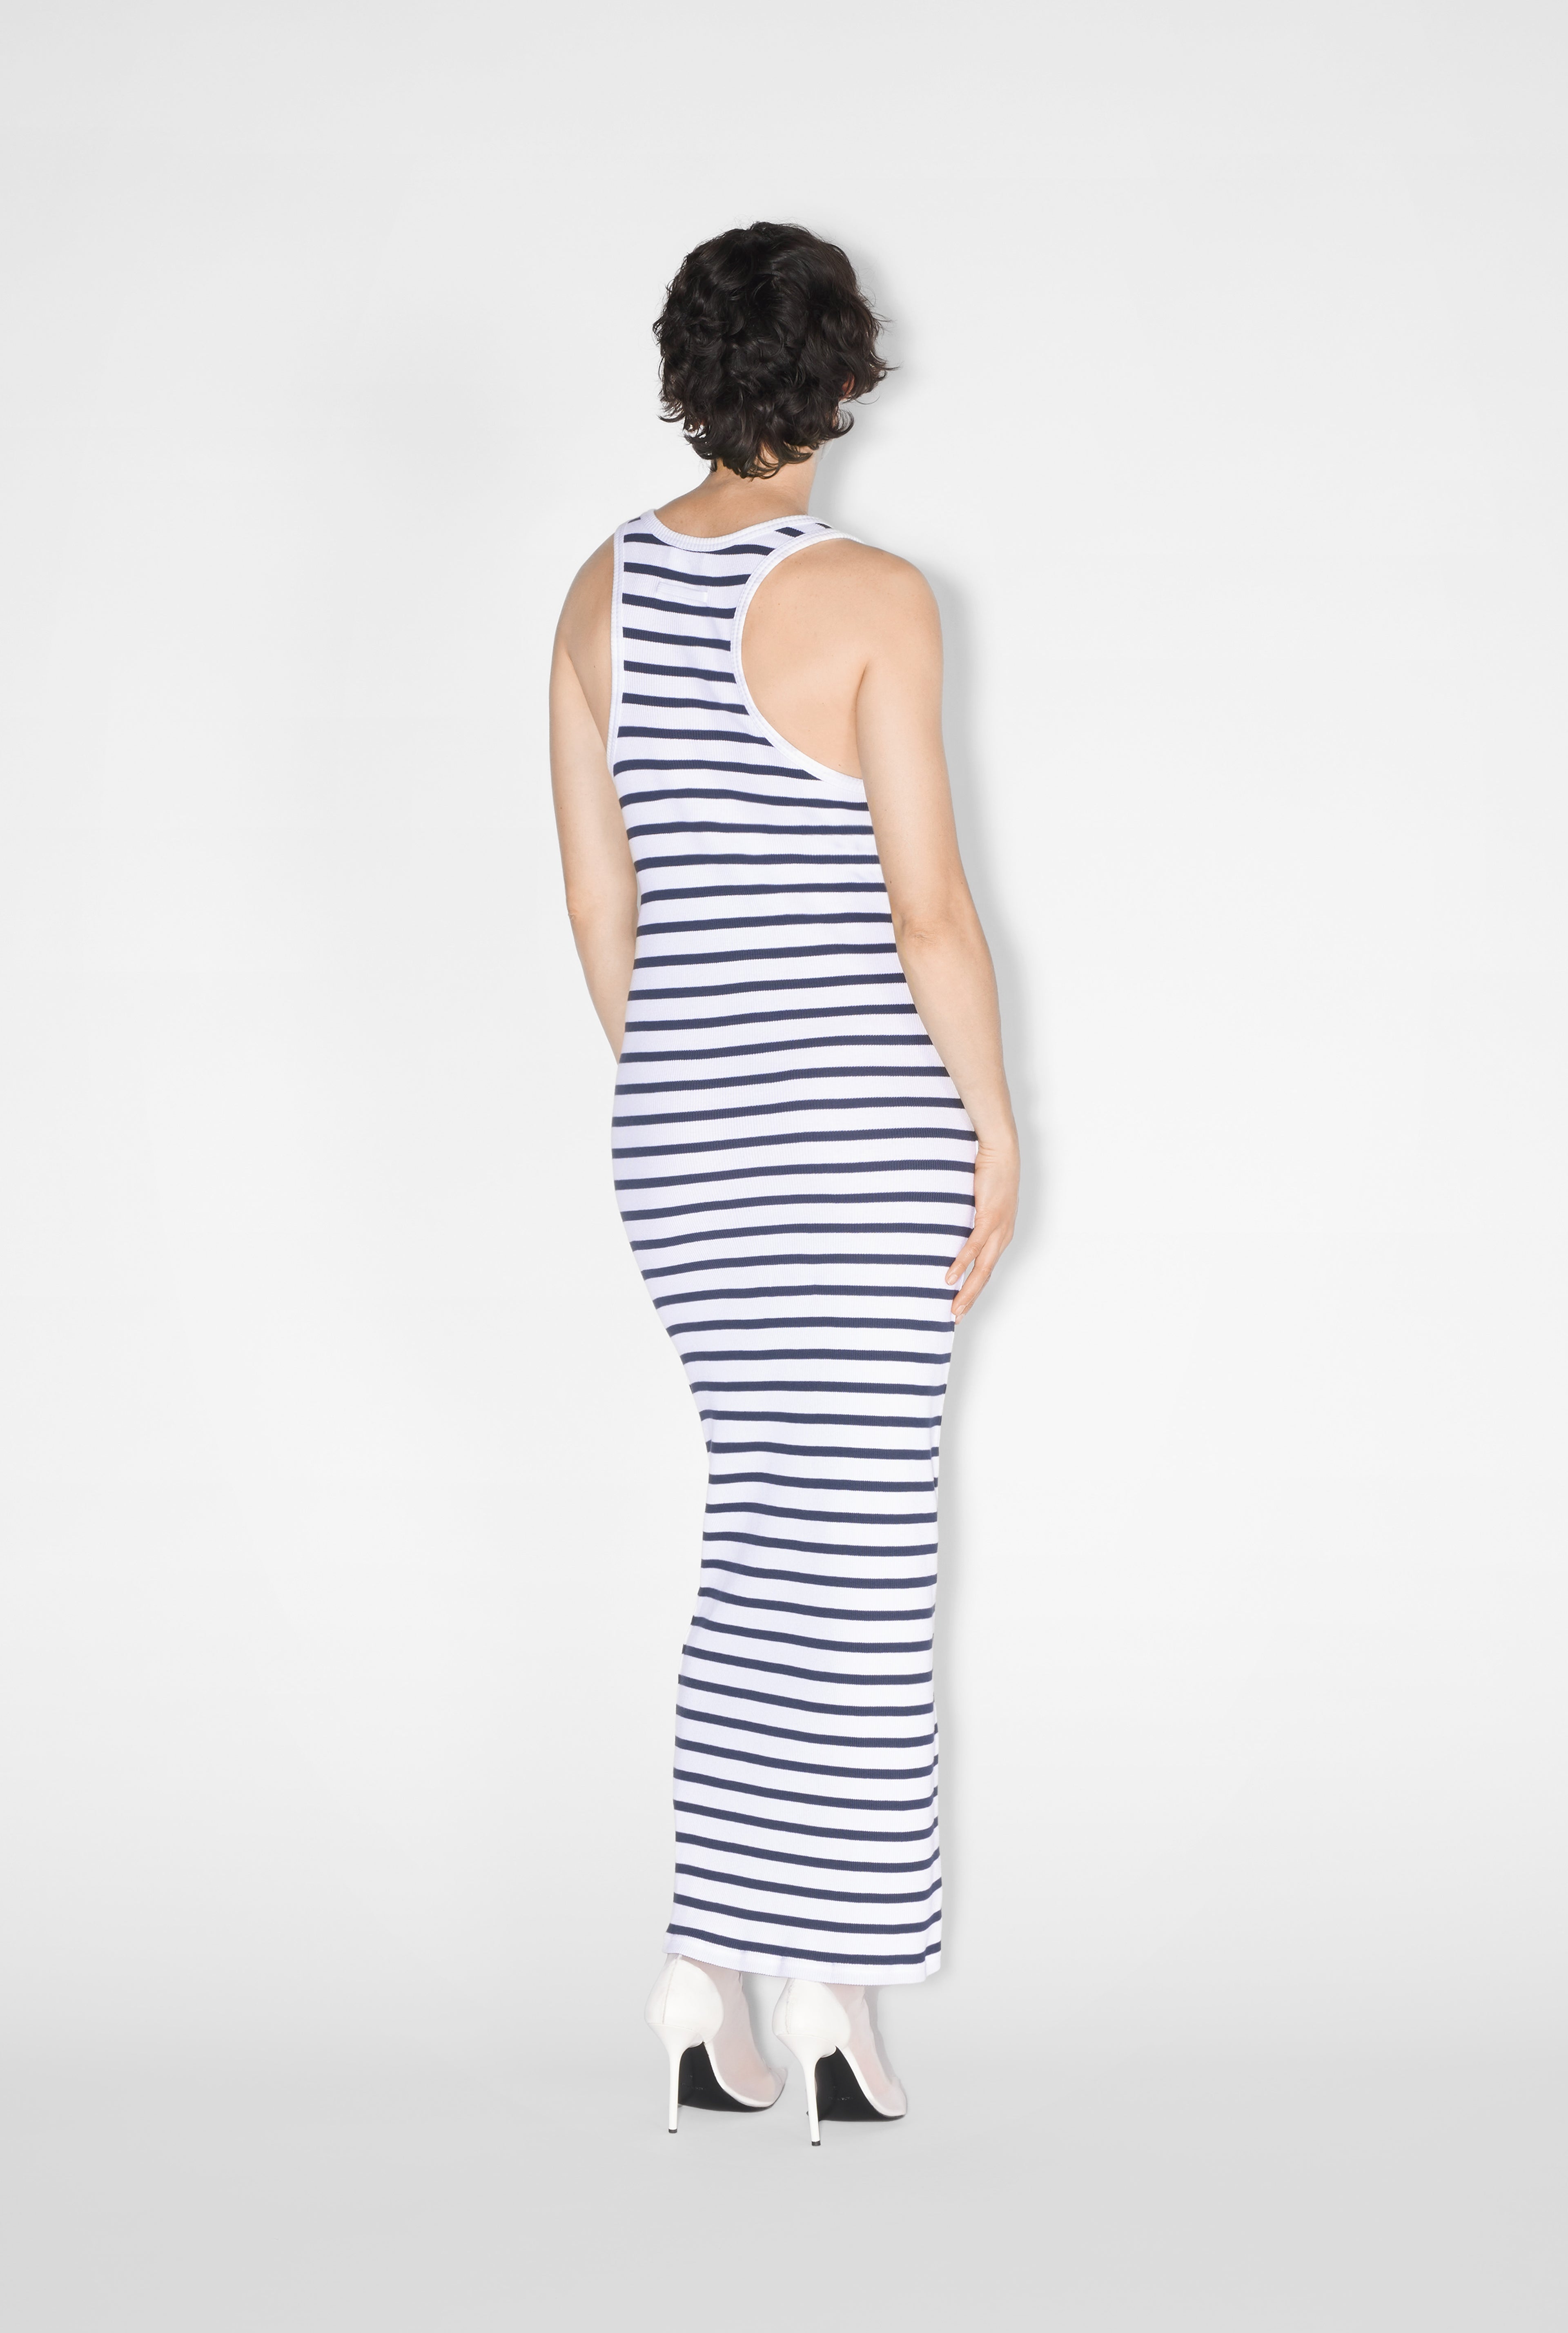 The White Strapped Marinière Dress 